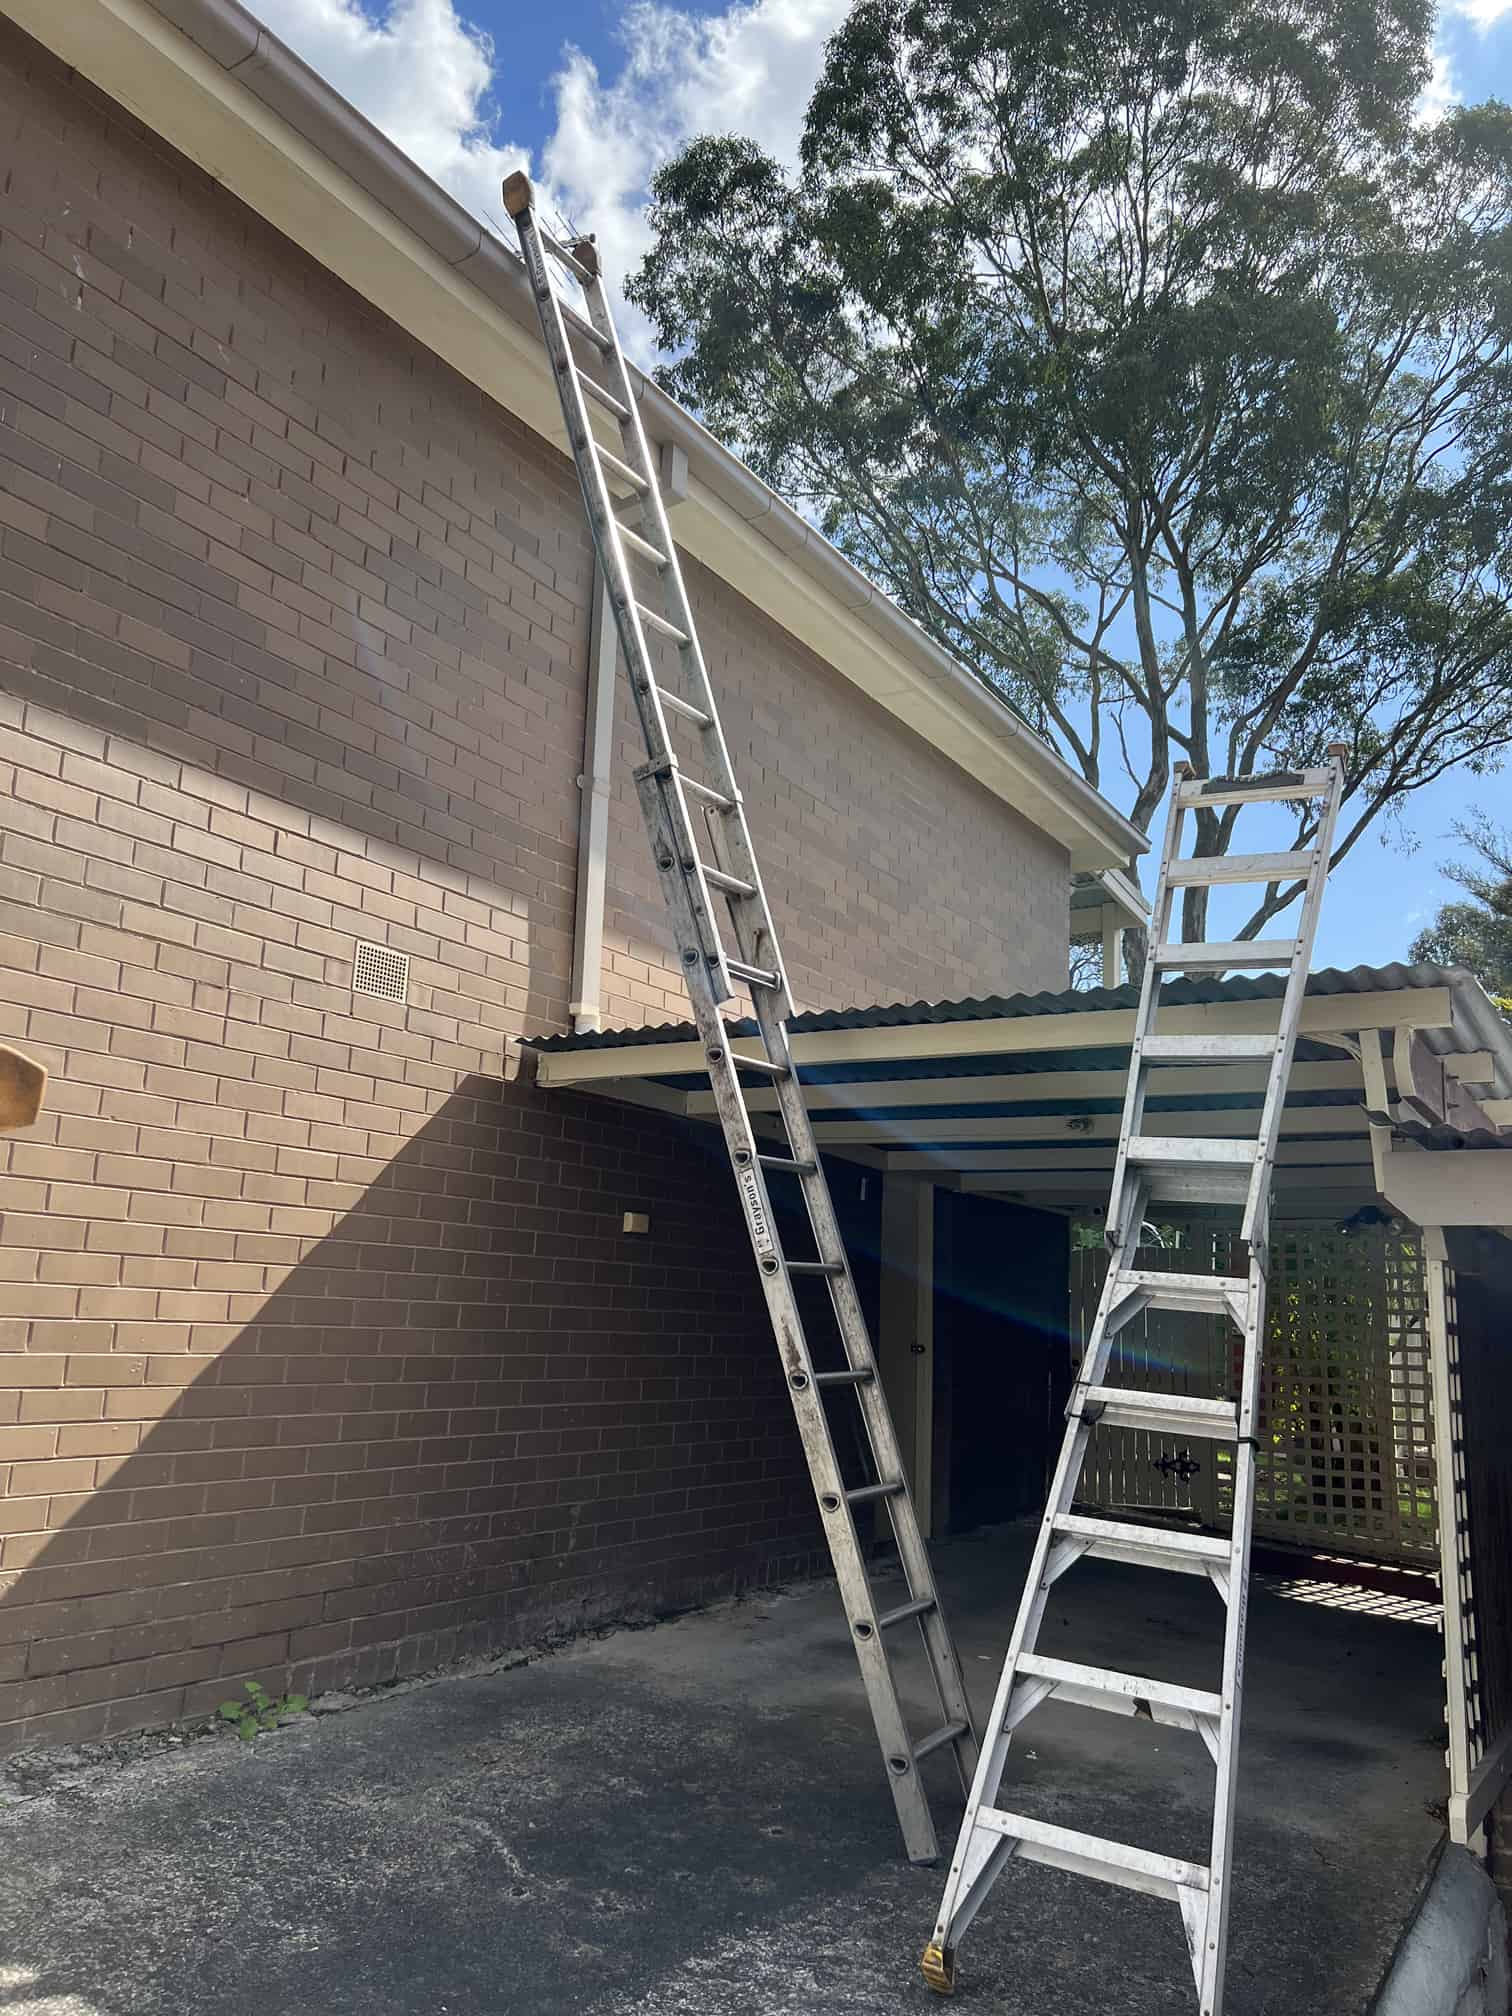 Two different ladders to access different roof heights